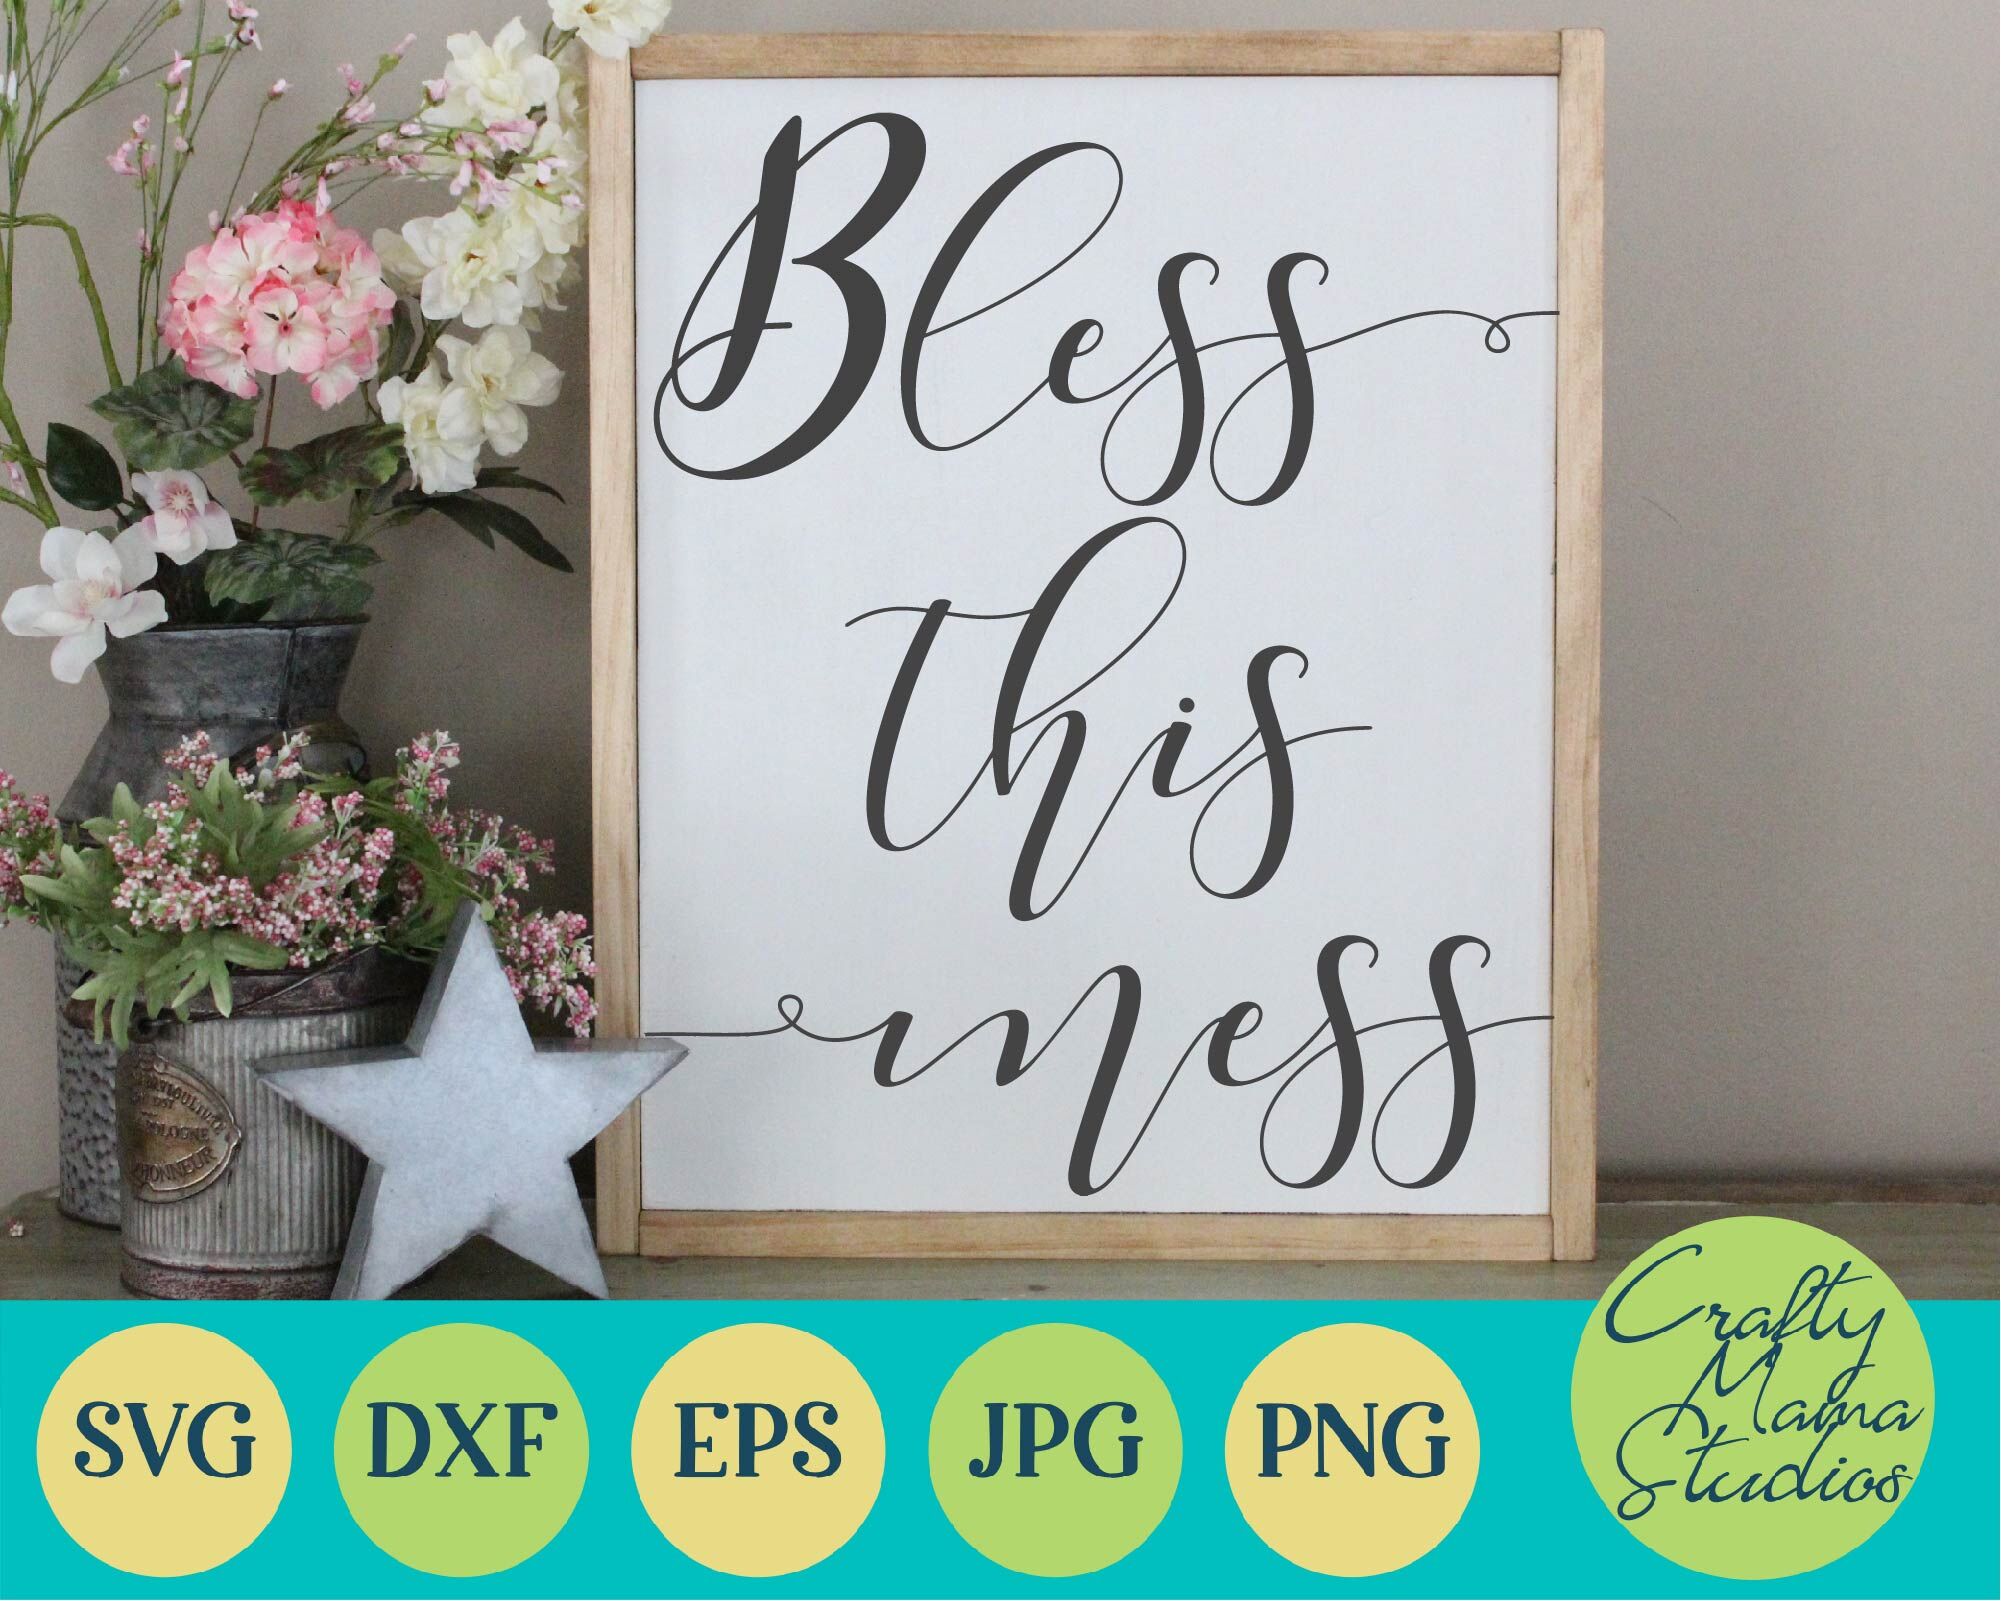 Download Bless This Mess Svg, Bless Our Home Svg, Funny By Crafty ...